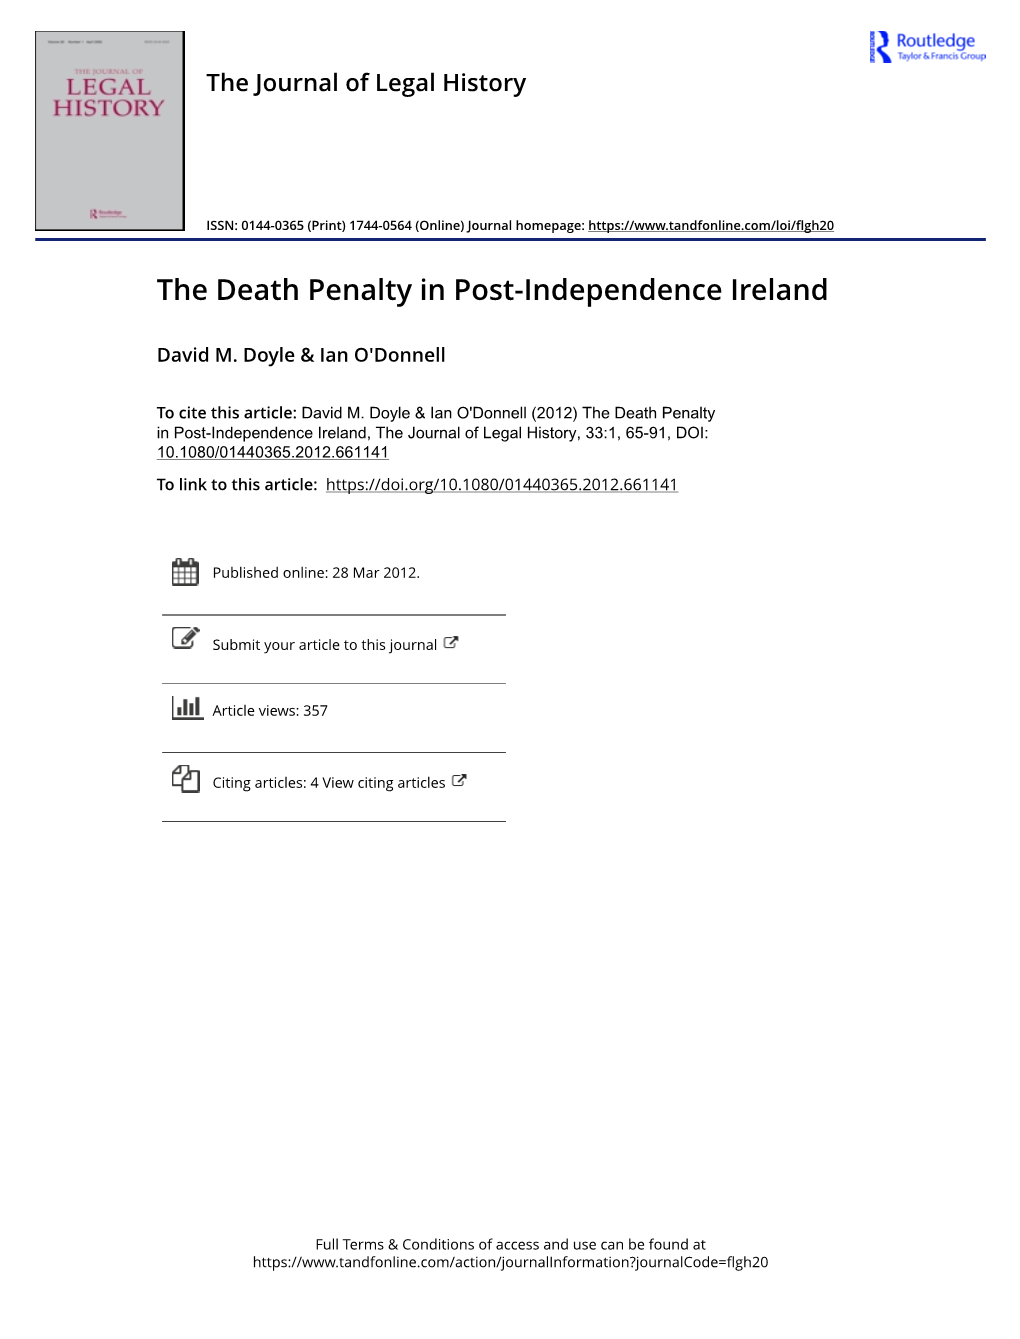 The Death Penalty in Post-Independence Ireland